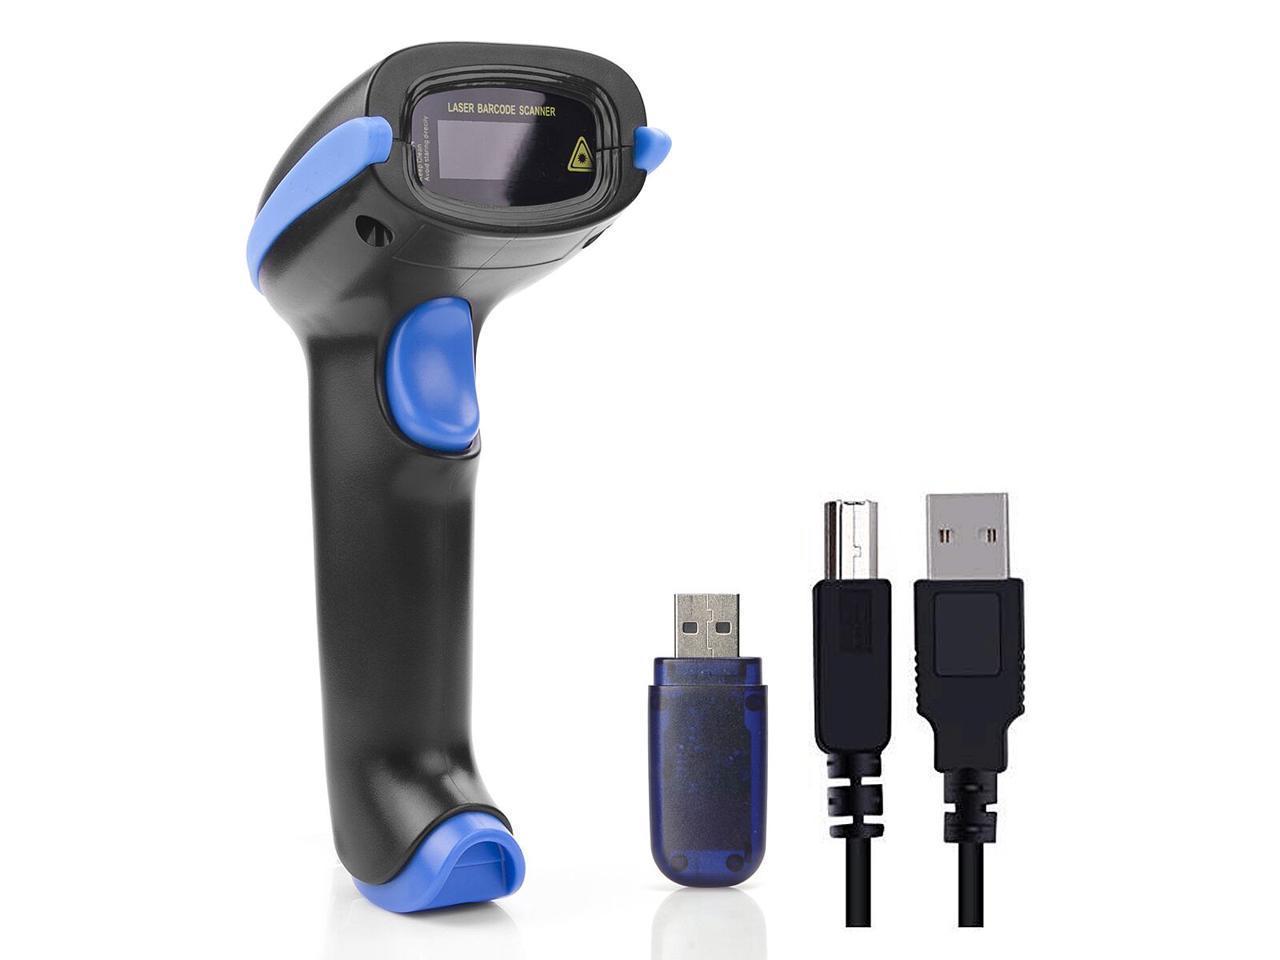 Warehouses Supermarkets 2.4GHZ 2Way Wireless Barcode Scanner 328 Feet Transmission Distance USB Wireless 1D Laser Automatic Barcode Reader with USB Receiver for Shops 